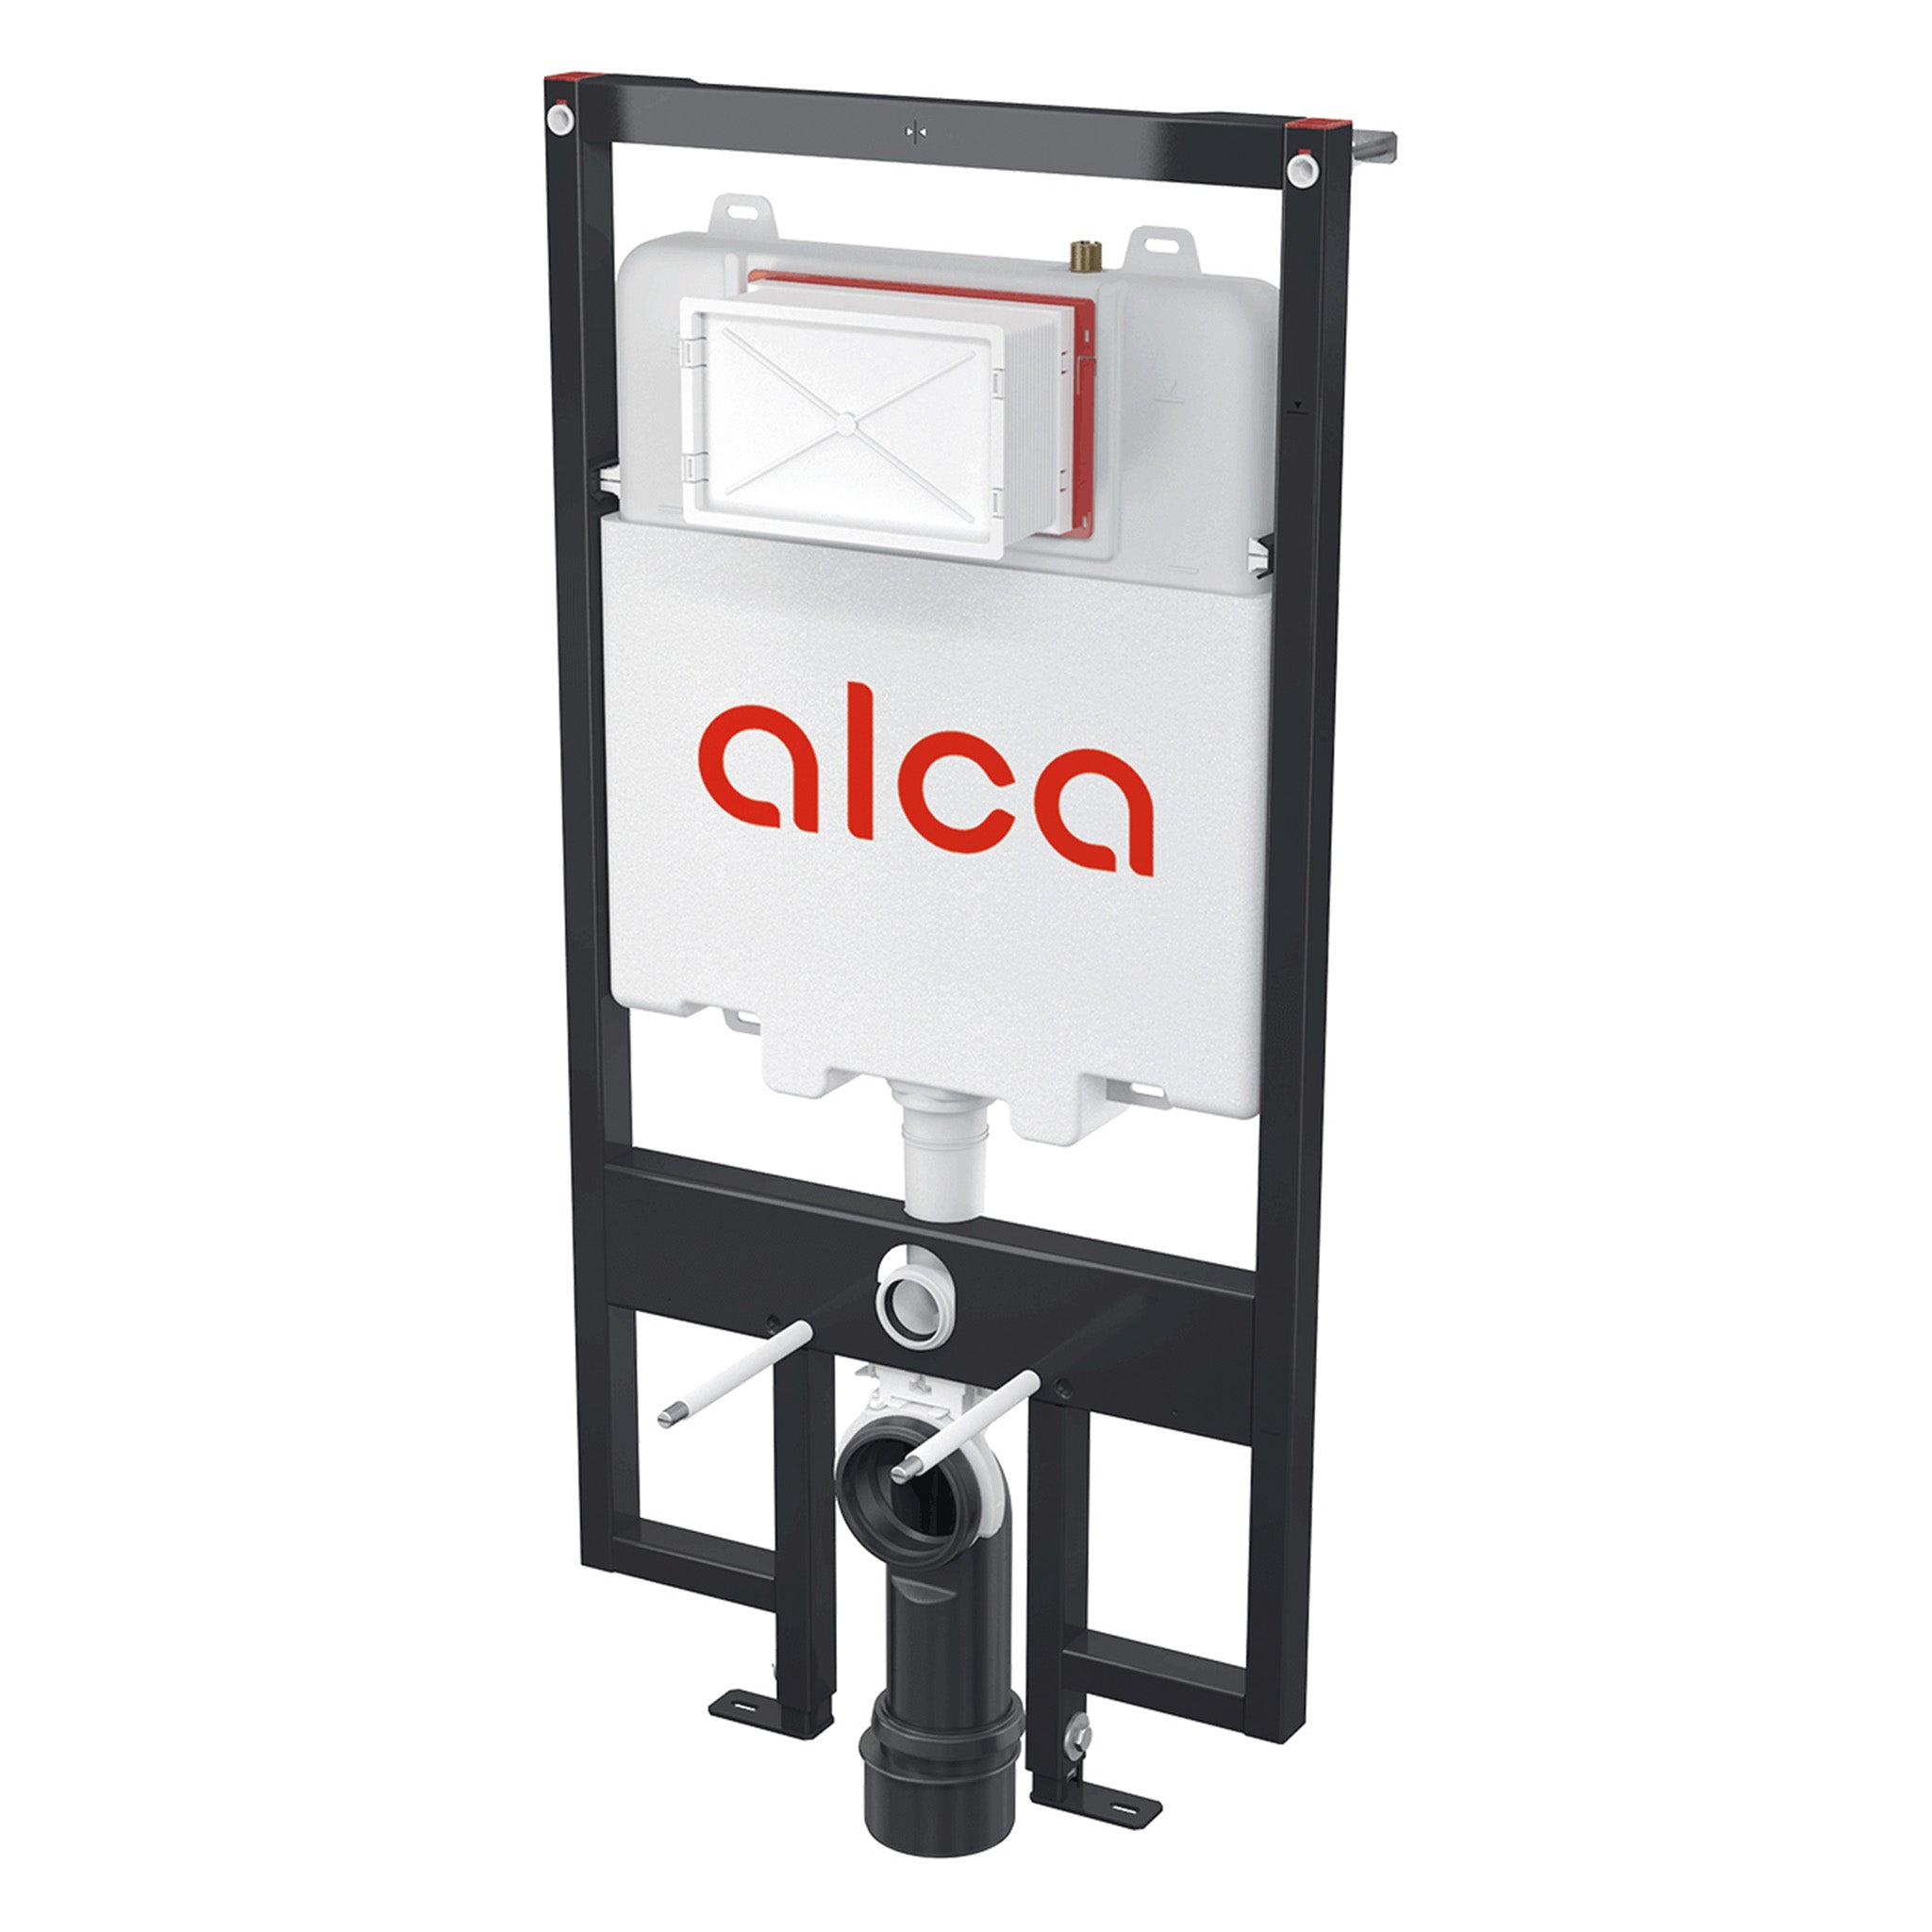 MyStyle Alca Slimline 120mm Wall Mounted Toilet Frame & Concealed Cistern